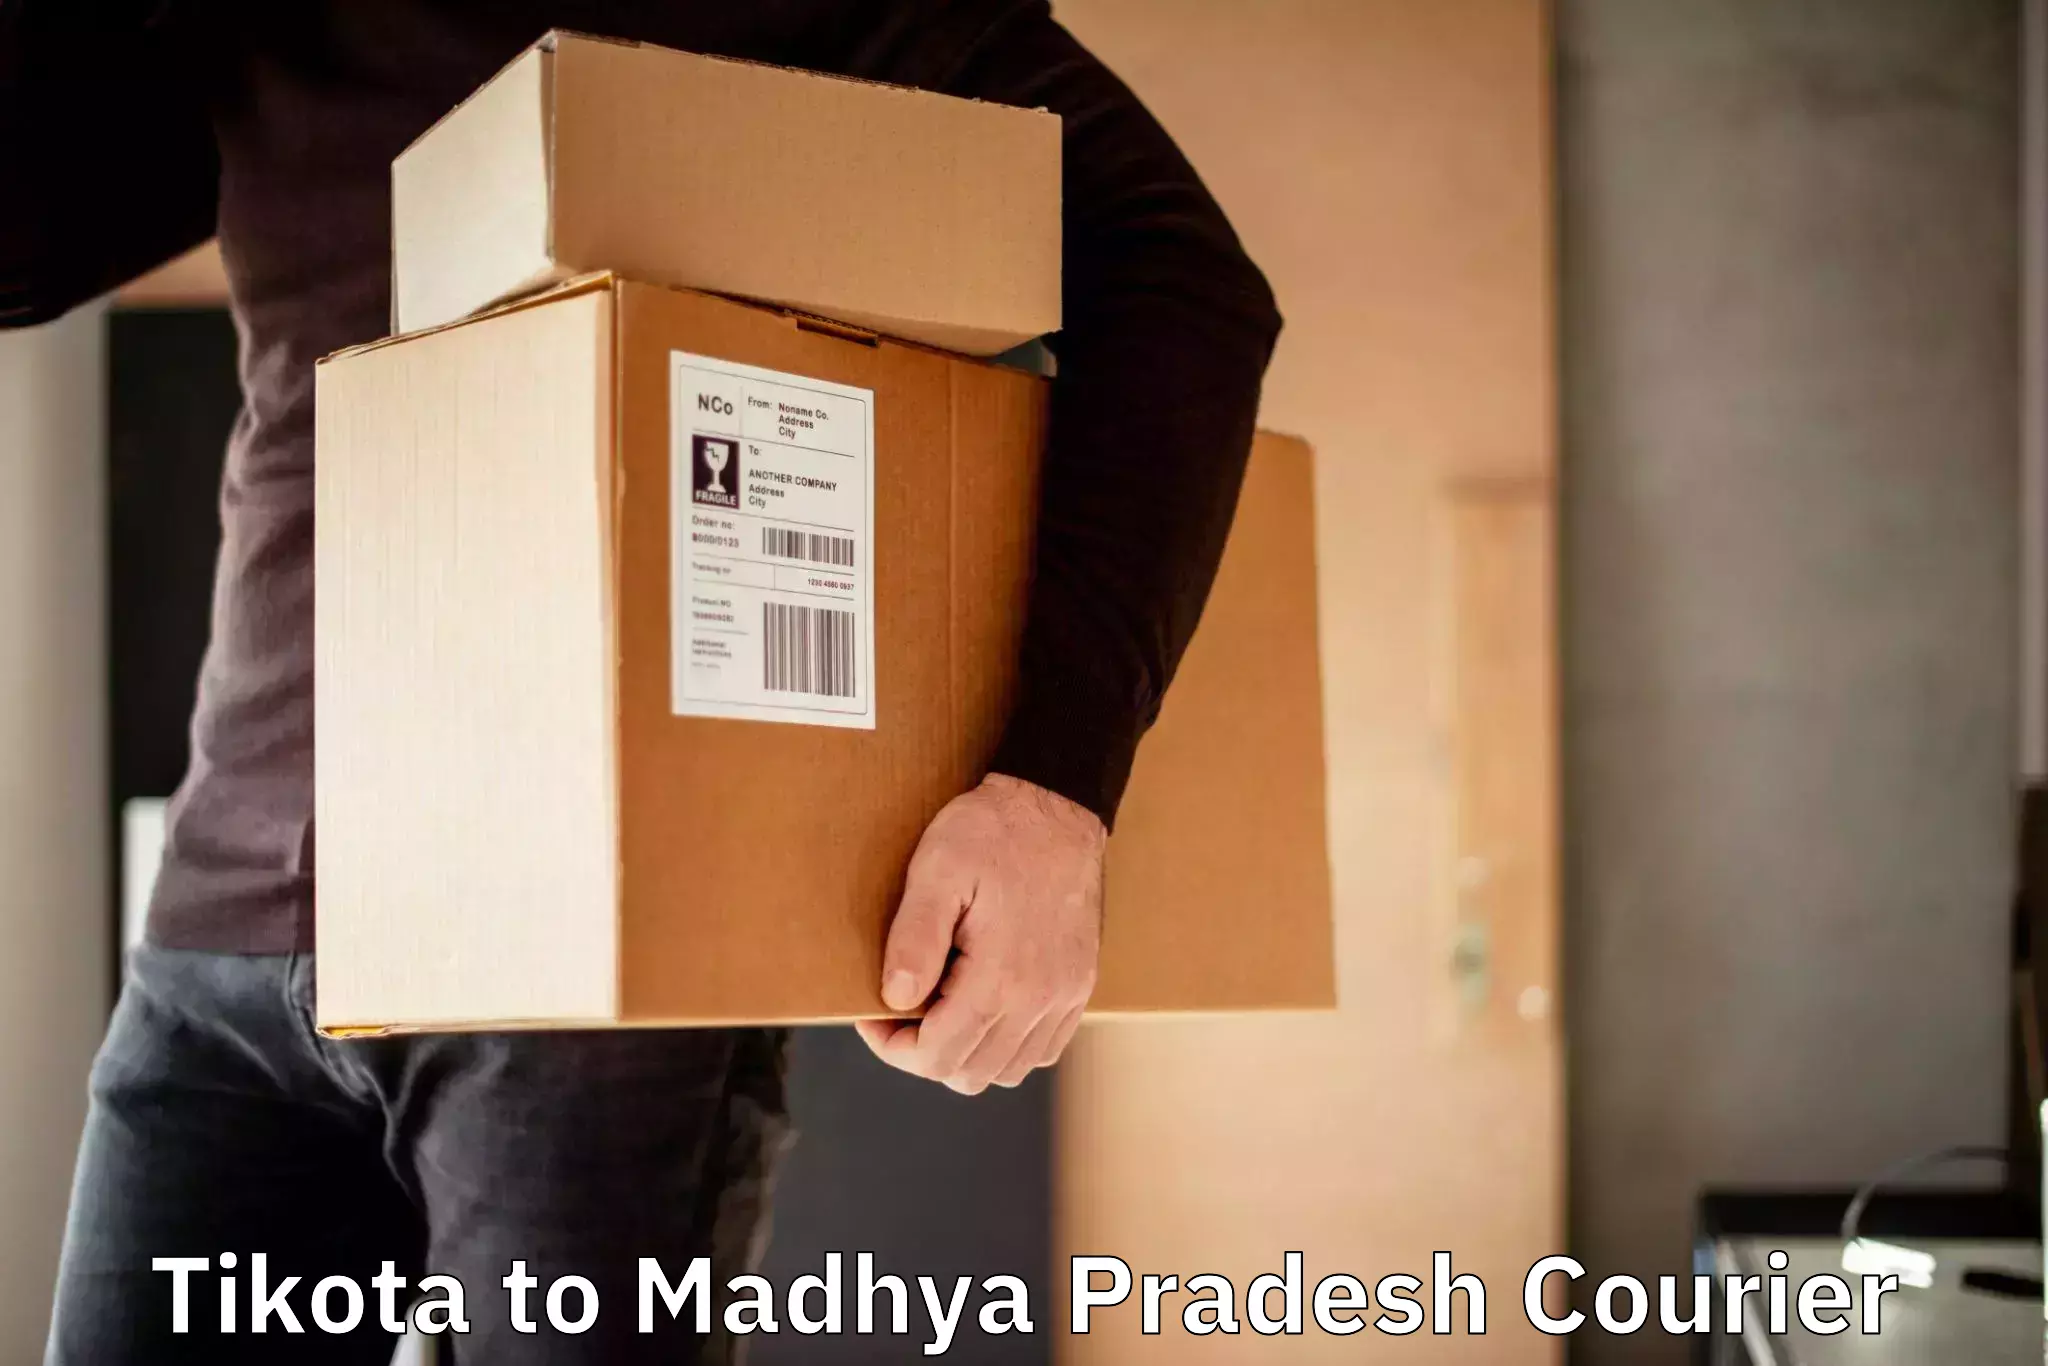 Nationwide parcel services Tikota to Gwalior